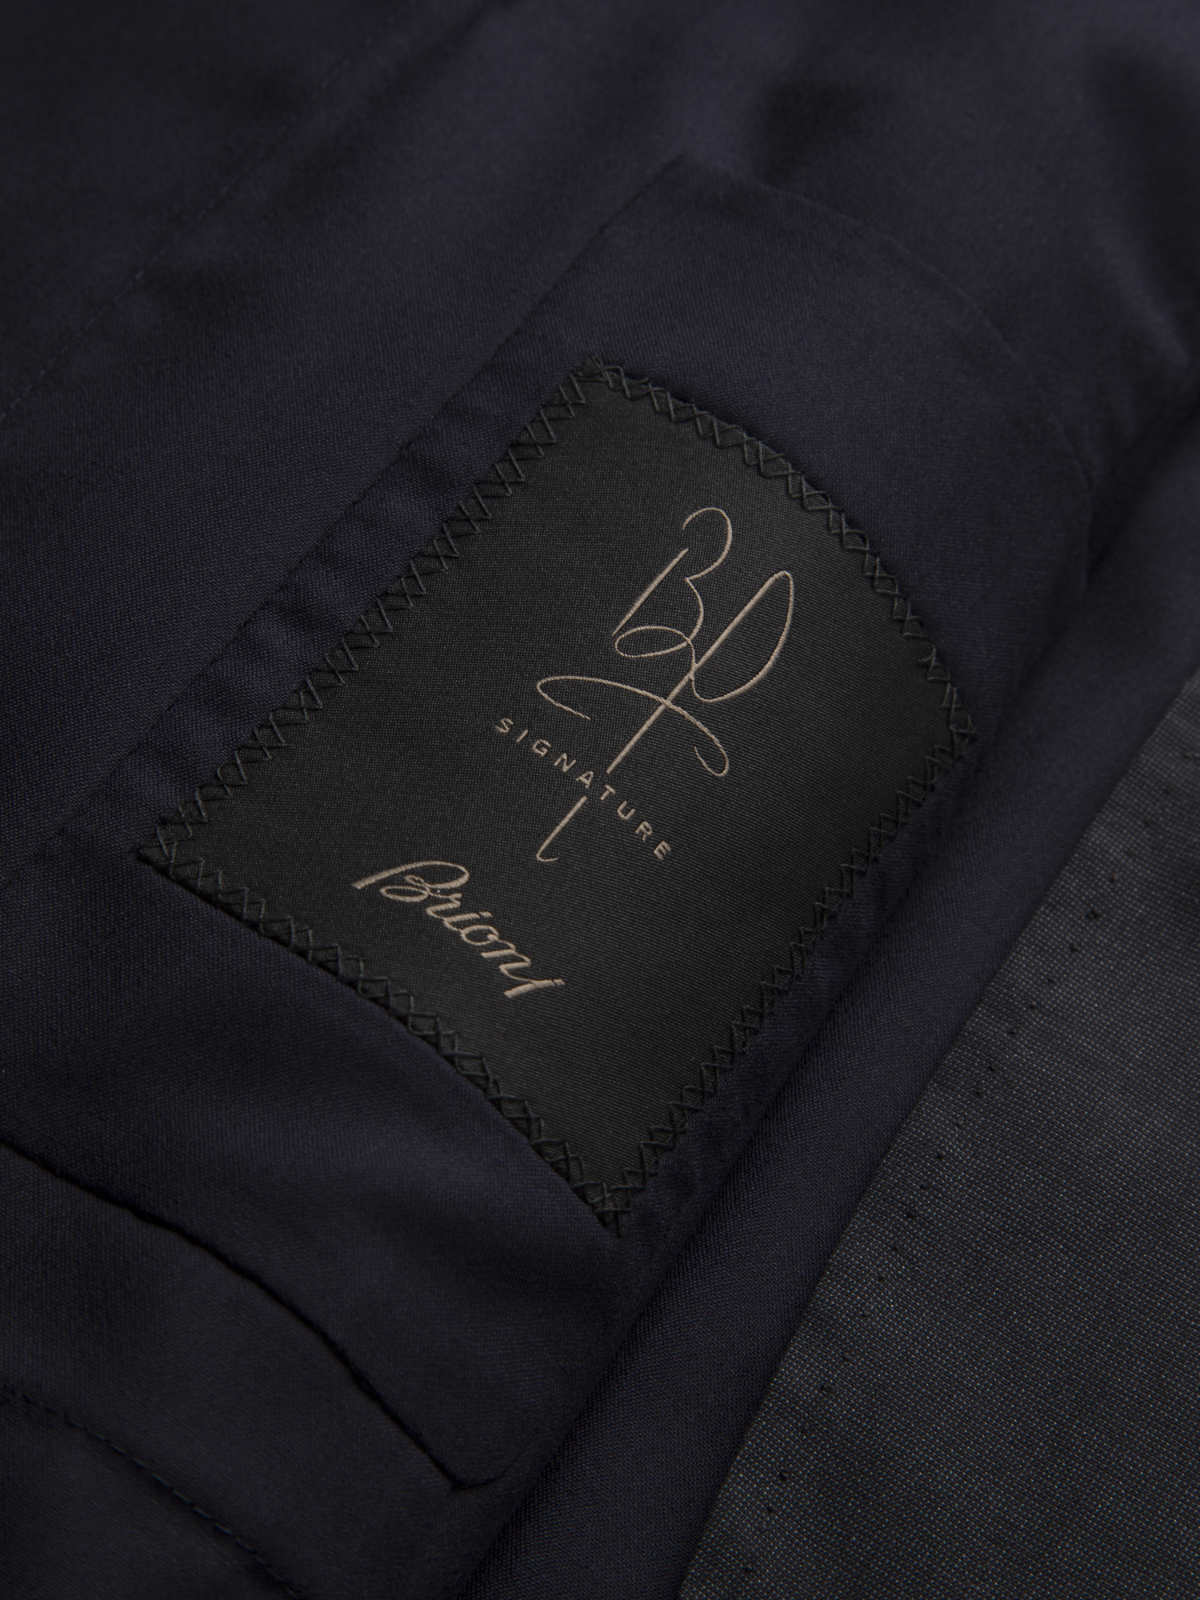 Brioni Introduces ‘BP Signature’, A Collection In Collaboration With Brad Pitt